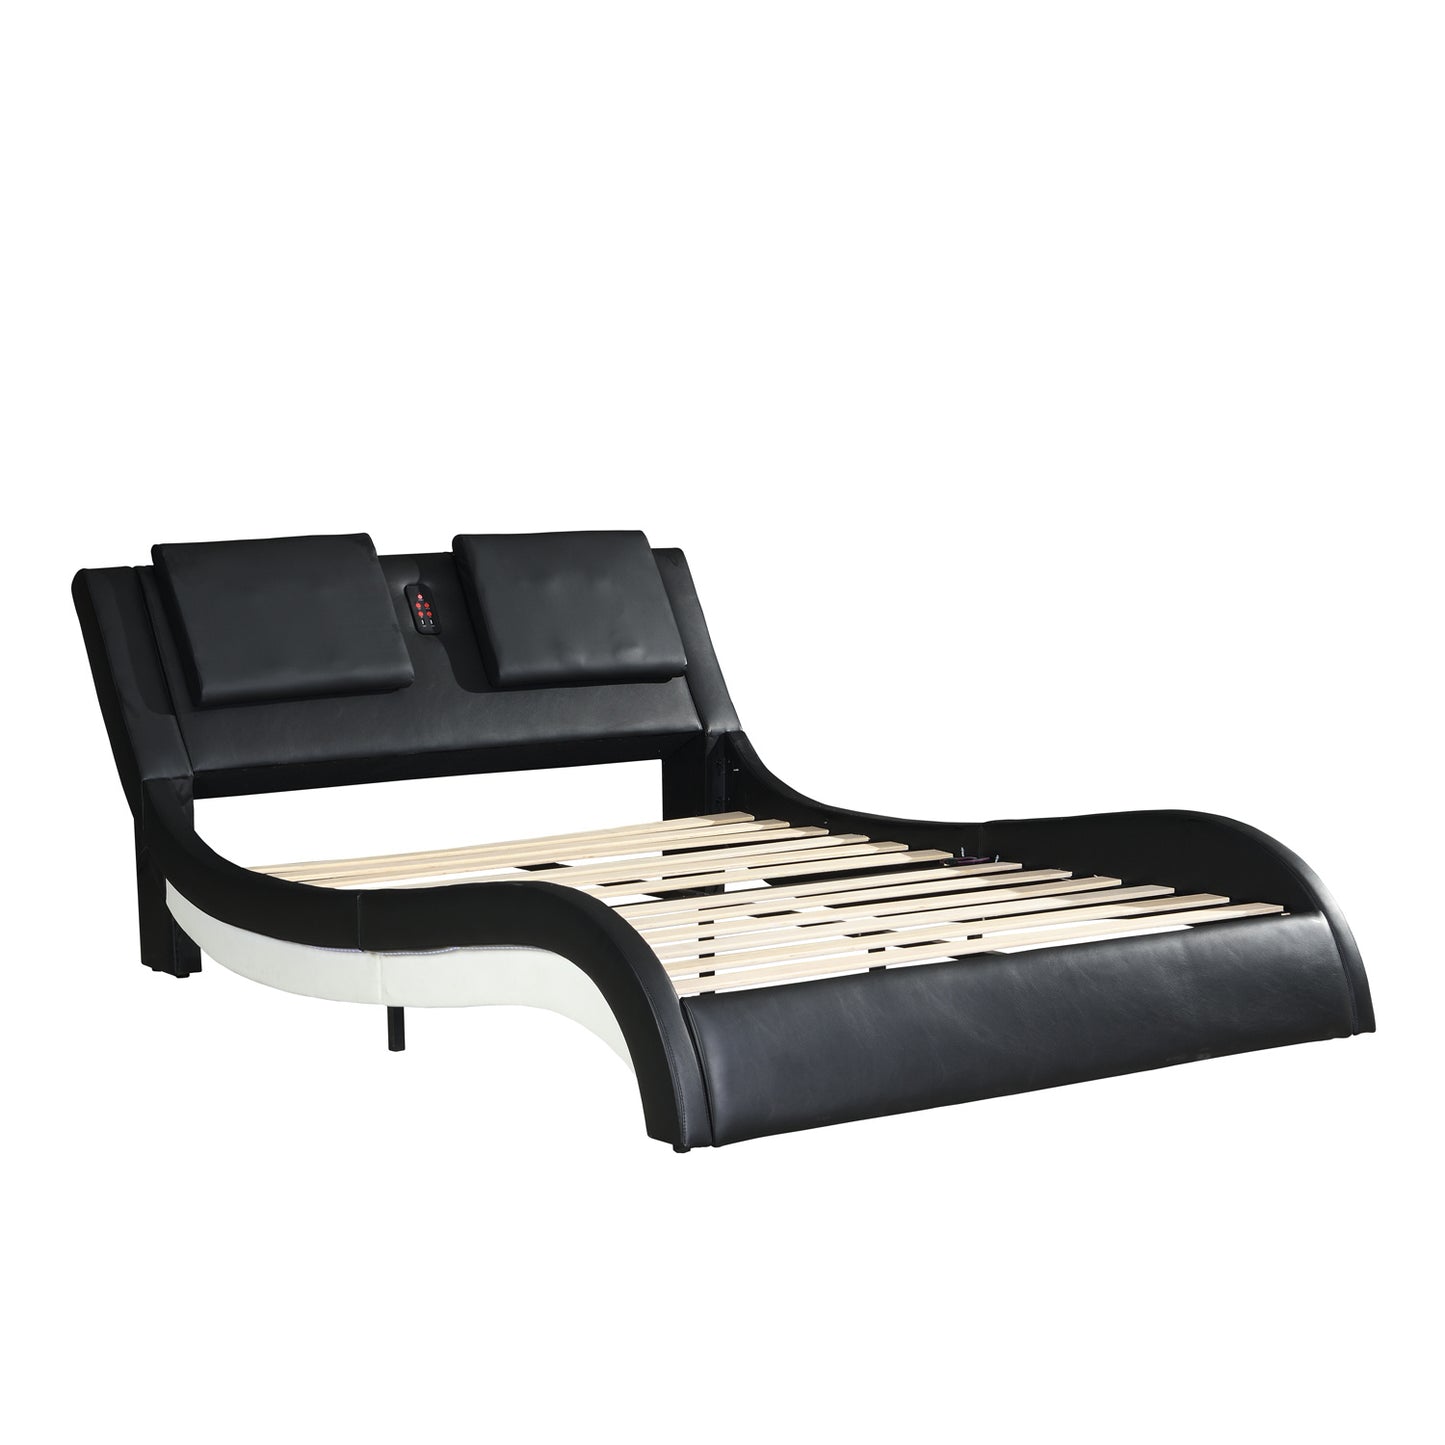 Leather Upholstered Platform Bed with LED lighting; Bluetooth connection to play music  RGB control; Backrest vibration massage